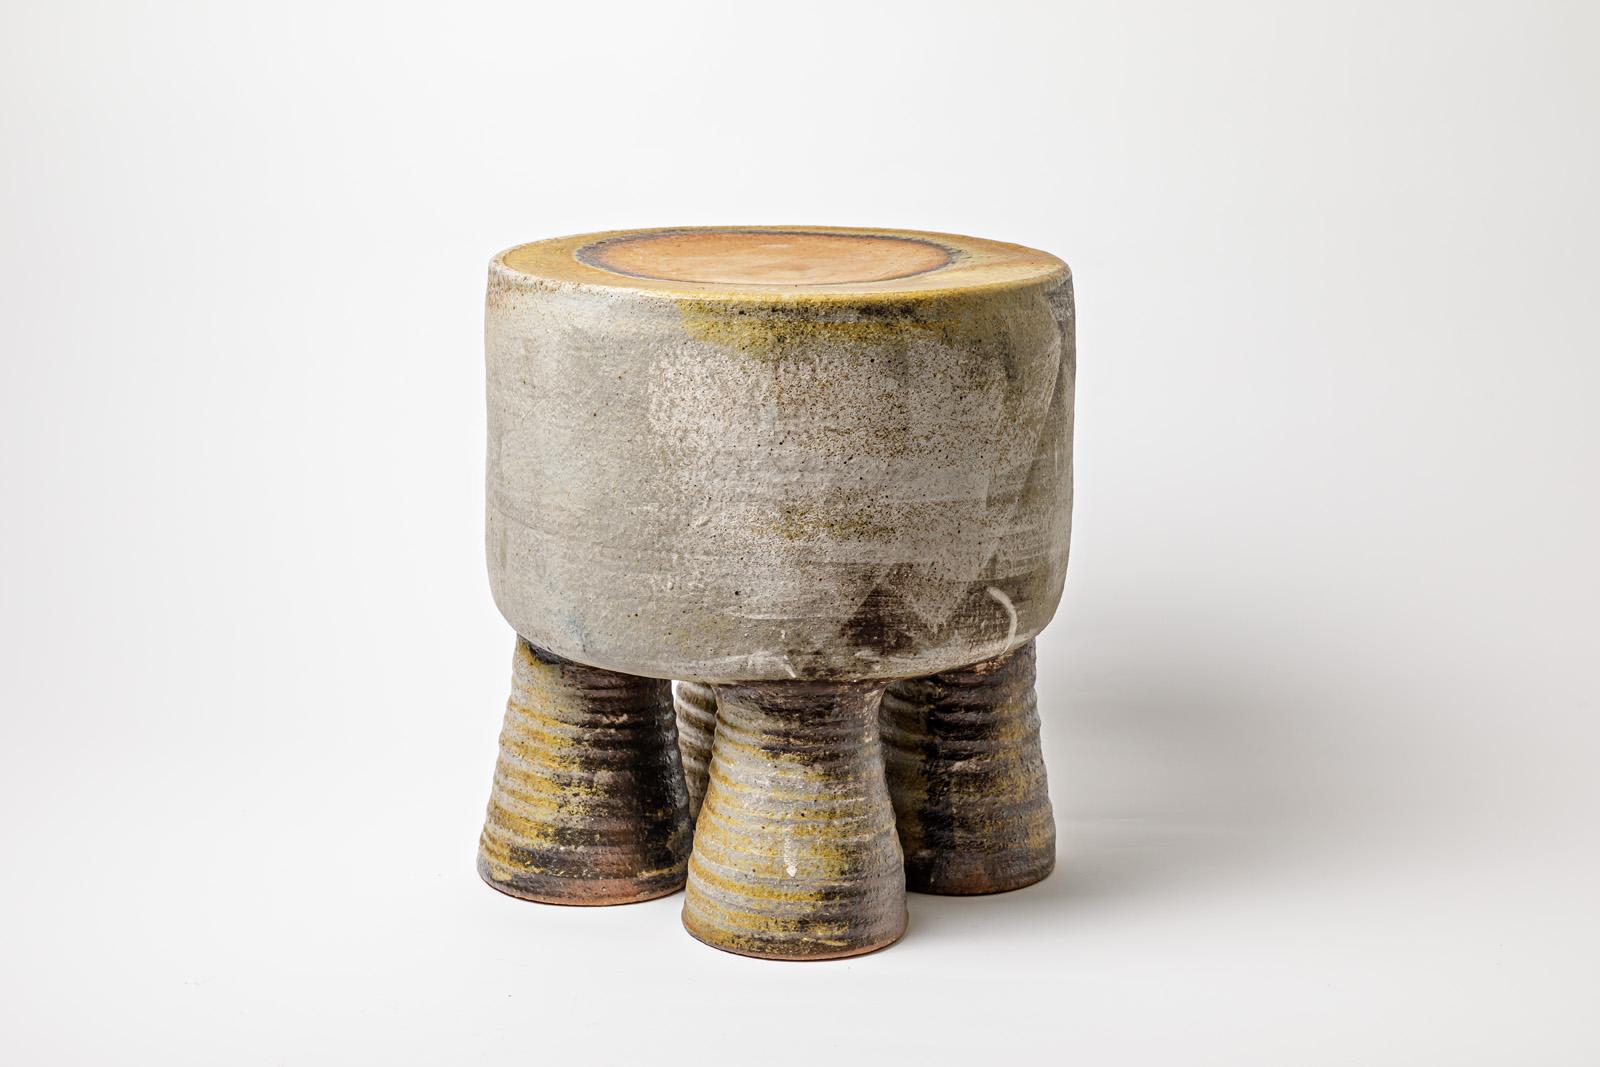 Wood fired ceramic stool or coffee table by Mia Jensen. 
Artist signature under the base. 2023.
H : 15.3’ x 14.2’ inches.